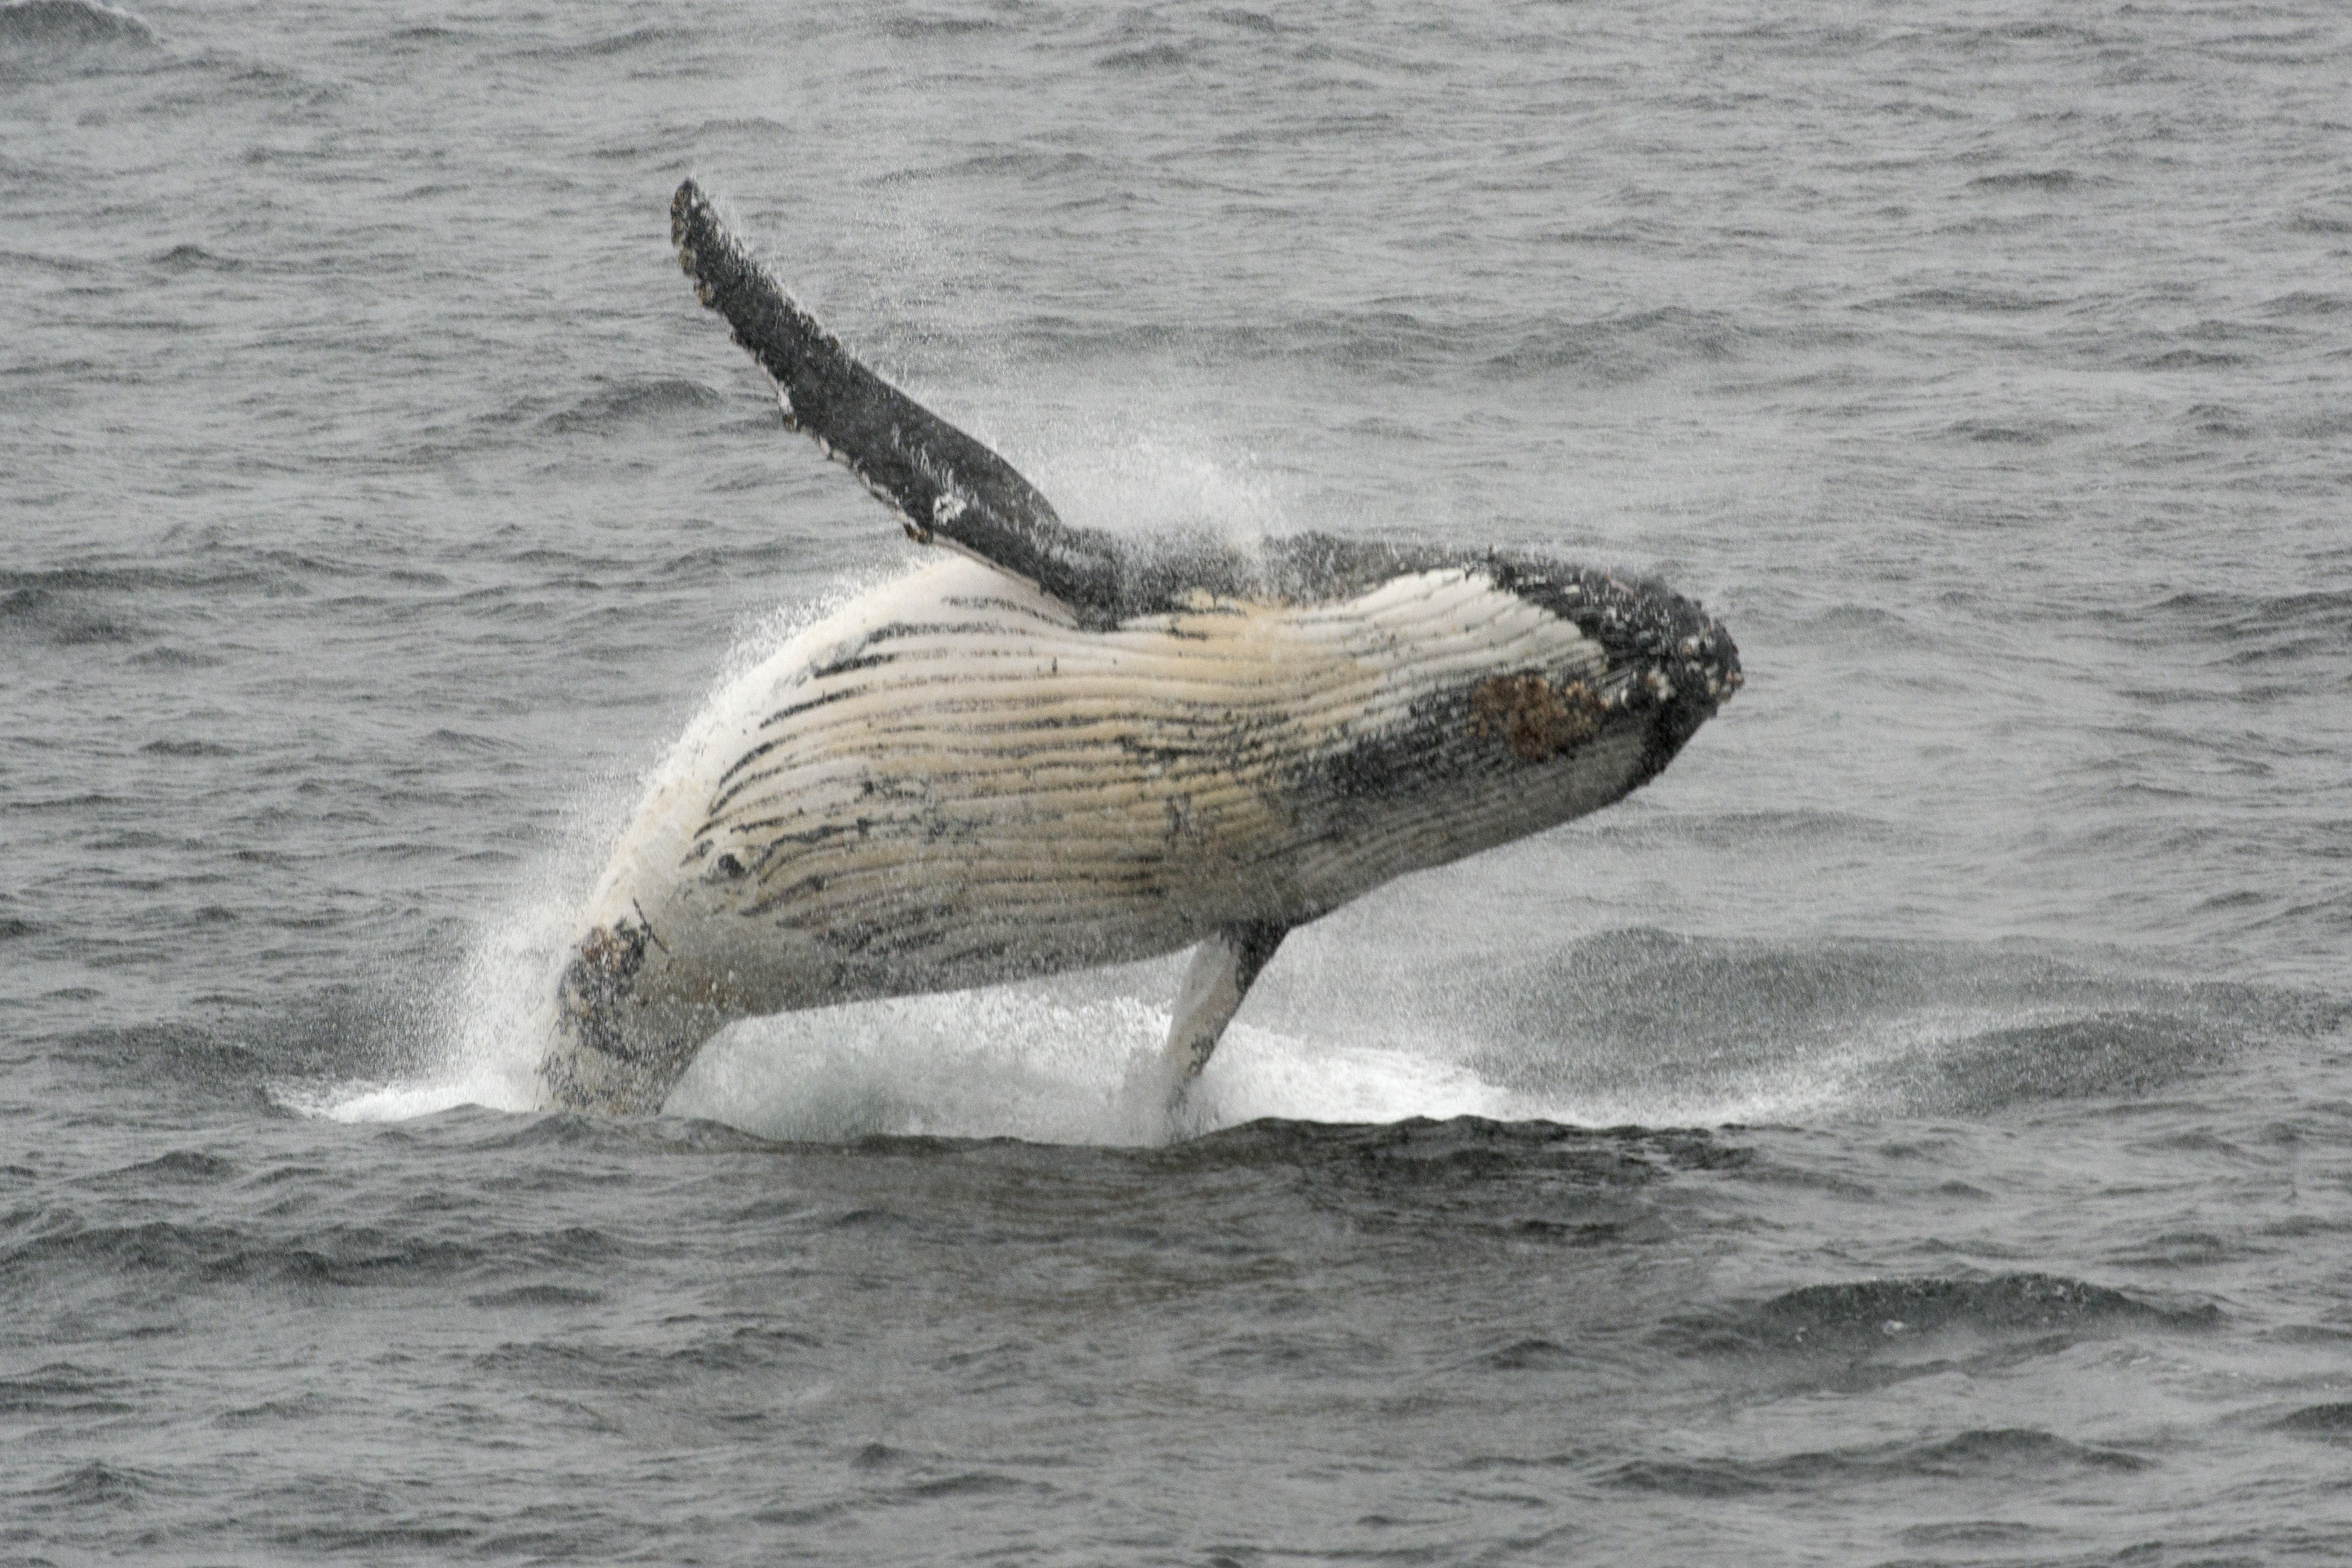 A humpback whale jumps out of the water in the western Antarctic peninsula, on March 05, 2016.  Waddling over the rocks, legions of penguins hurl themselves into the icy waters of Antarctica, foraging to feed their young. Like seals and whales, they eat krill, an inch-long shrimp-like crustacean that forms the basis of the Southern Ocean food chain. But penguin-watchers say the krill are getting scarcer in the western Antarctic peninsula, under threat from climate change and fishing.   / AFP PHOTO / EITAN ABRAMOVICH